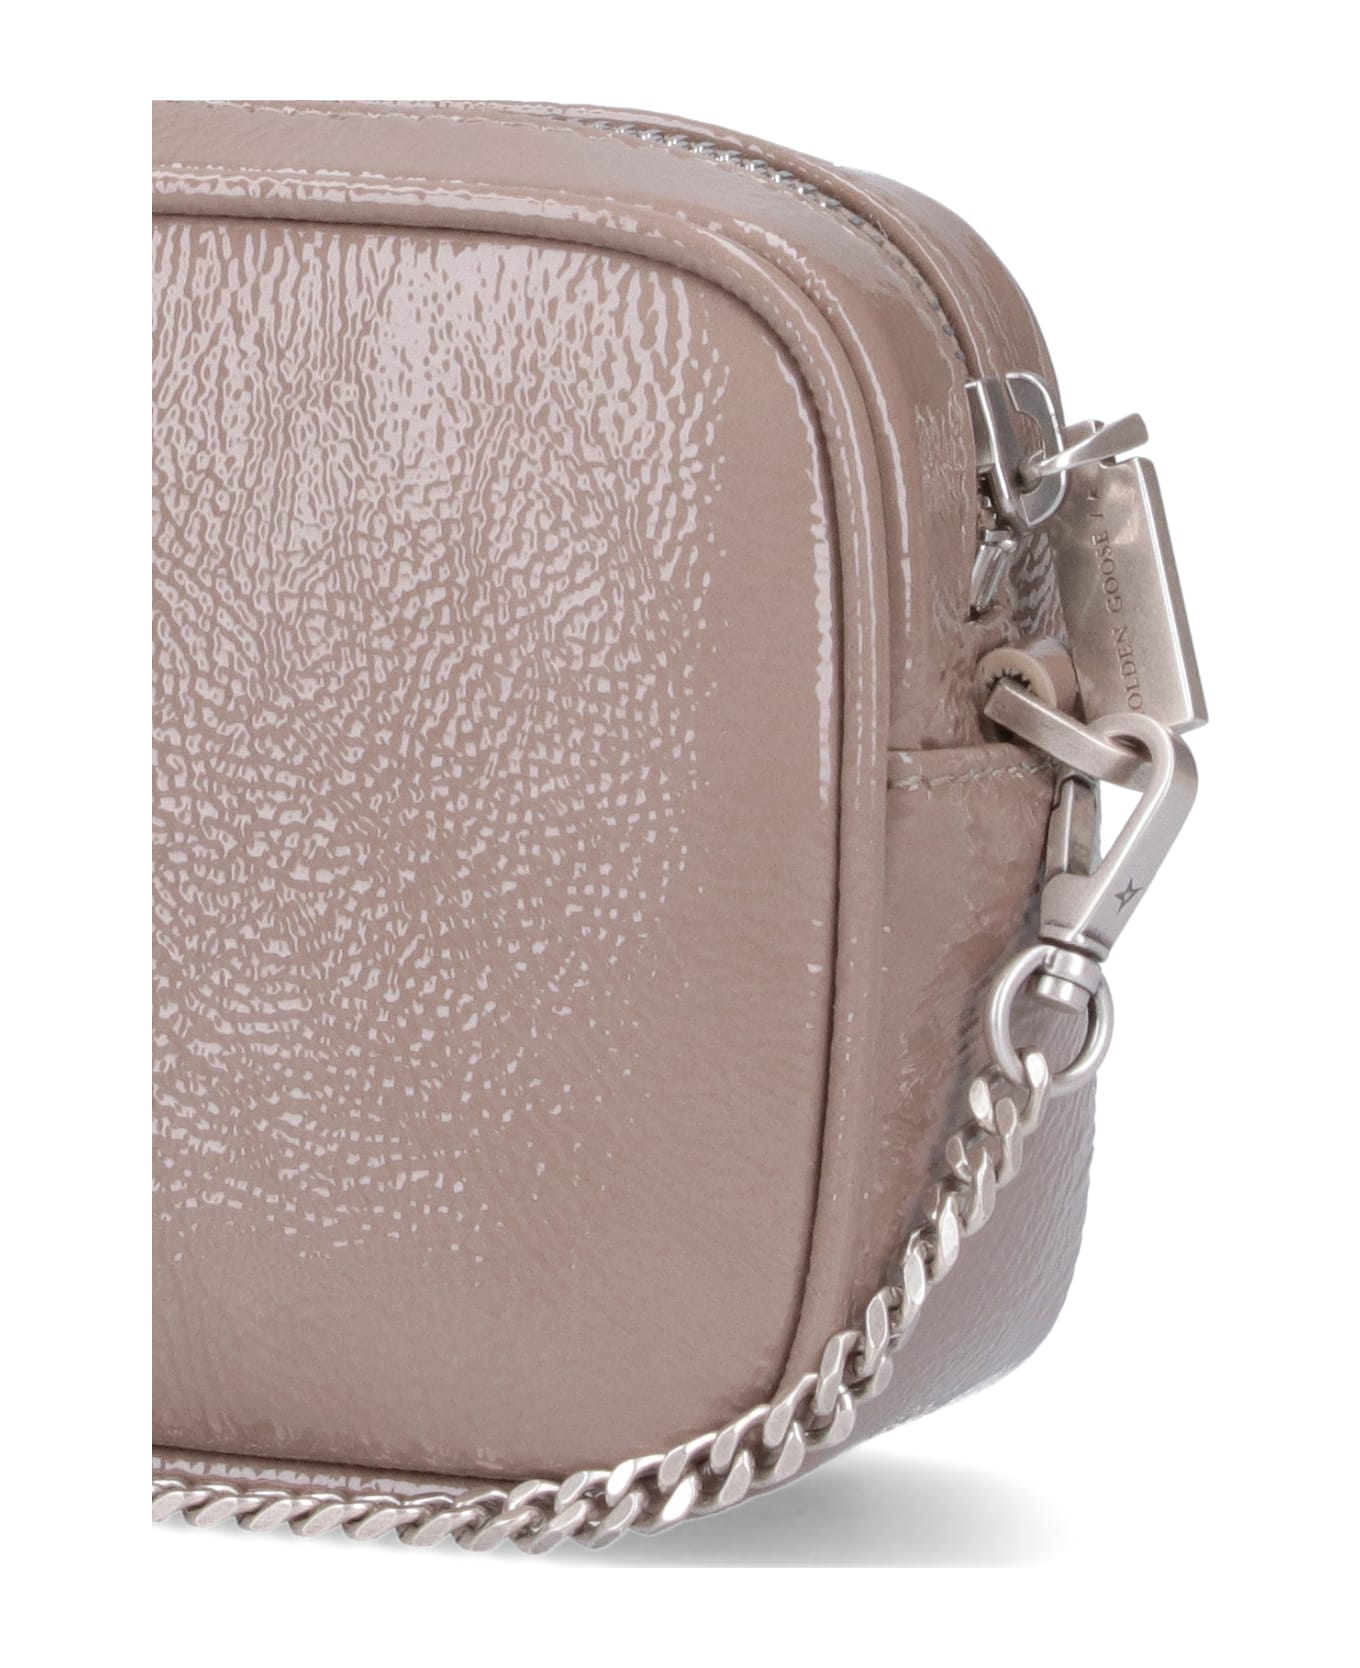 Golden Goose Star Crossbody Bag In Dove-gray Leather - Taupe